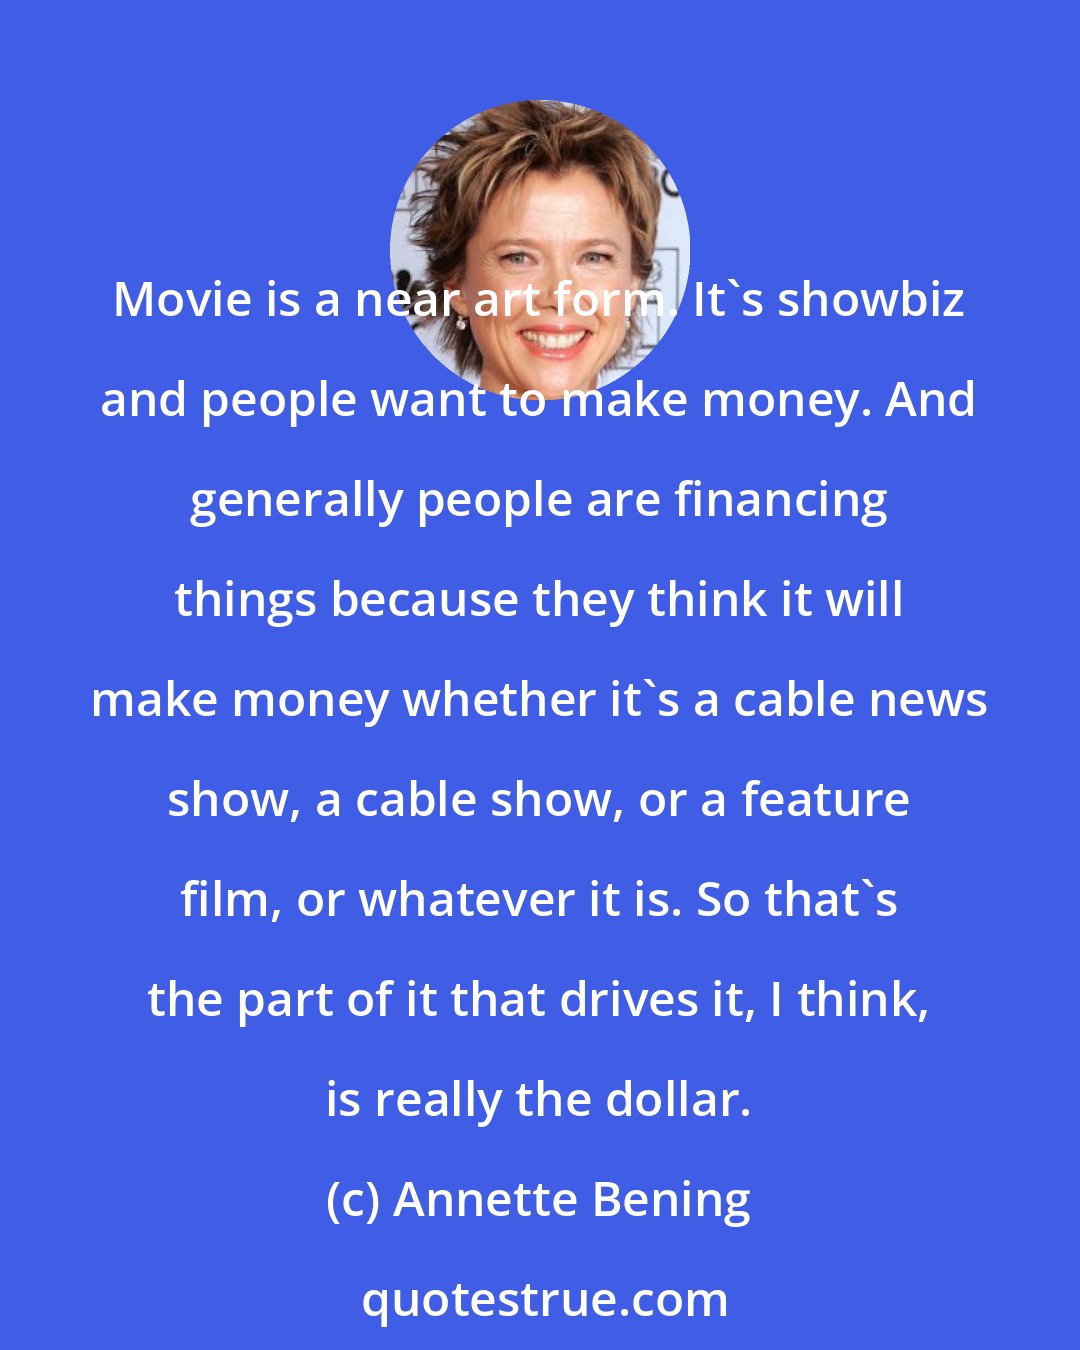 Annette Bening: Movie is a near art form. It's showbiz and people want to make money. And generally people are financing things because they think it will make money whether it's a cable news show, a cable show, or a feature film, or whatever it is. So that's the part of it that drives it, I think, is really the dollar.